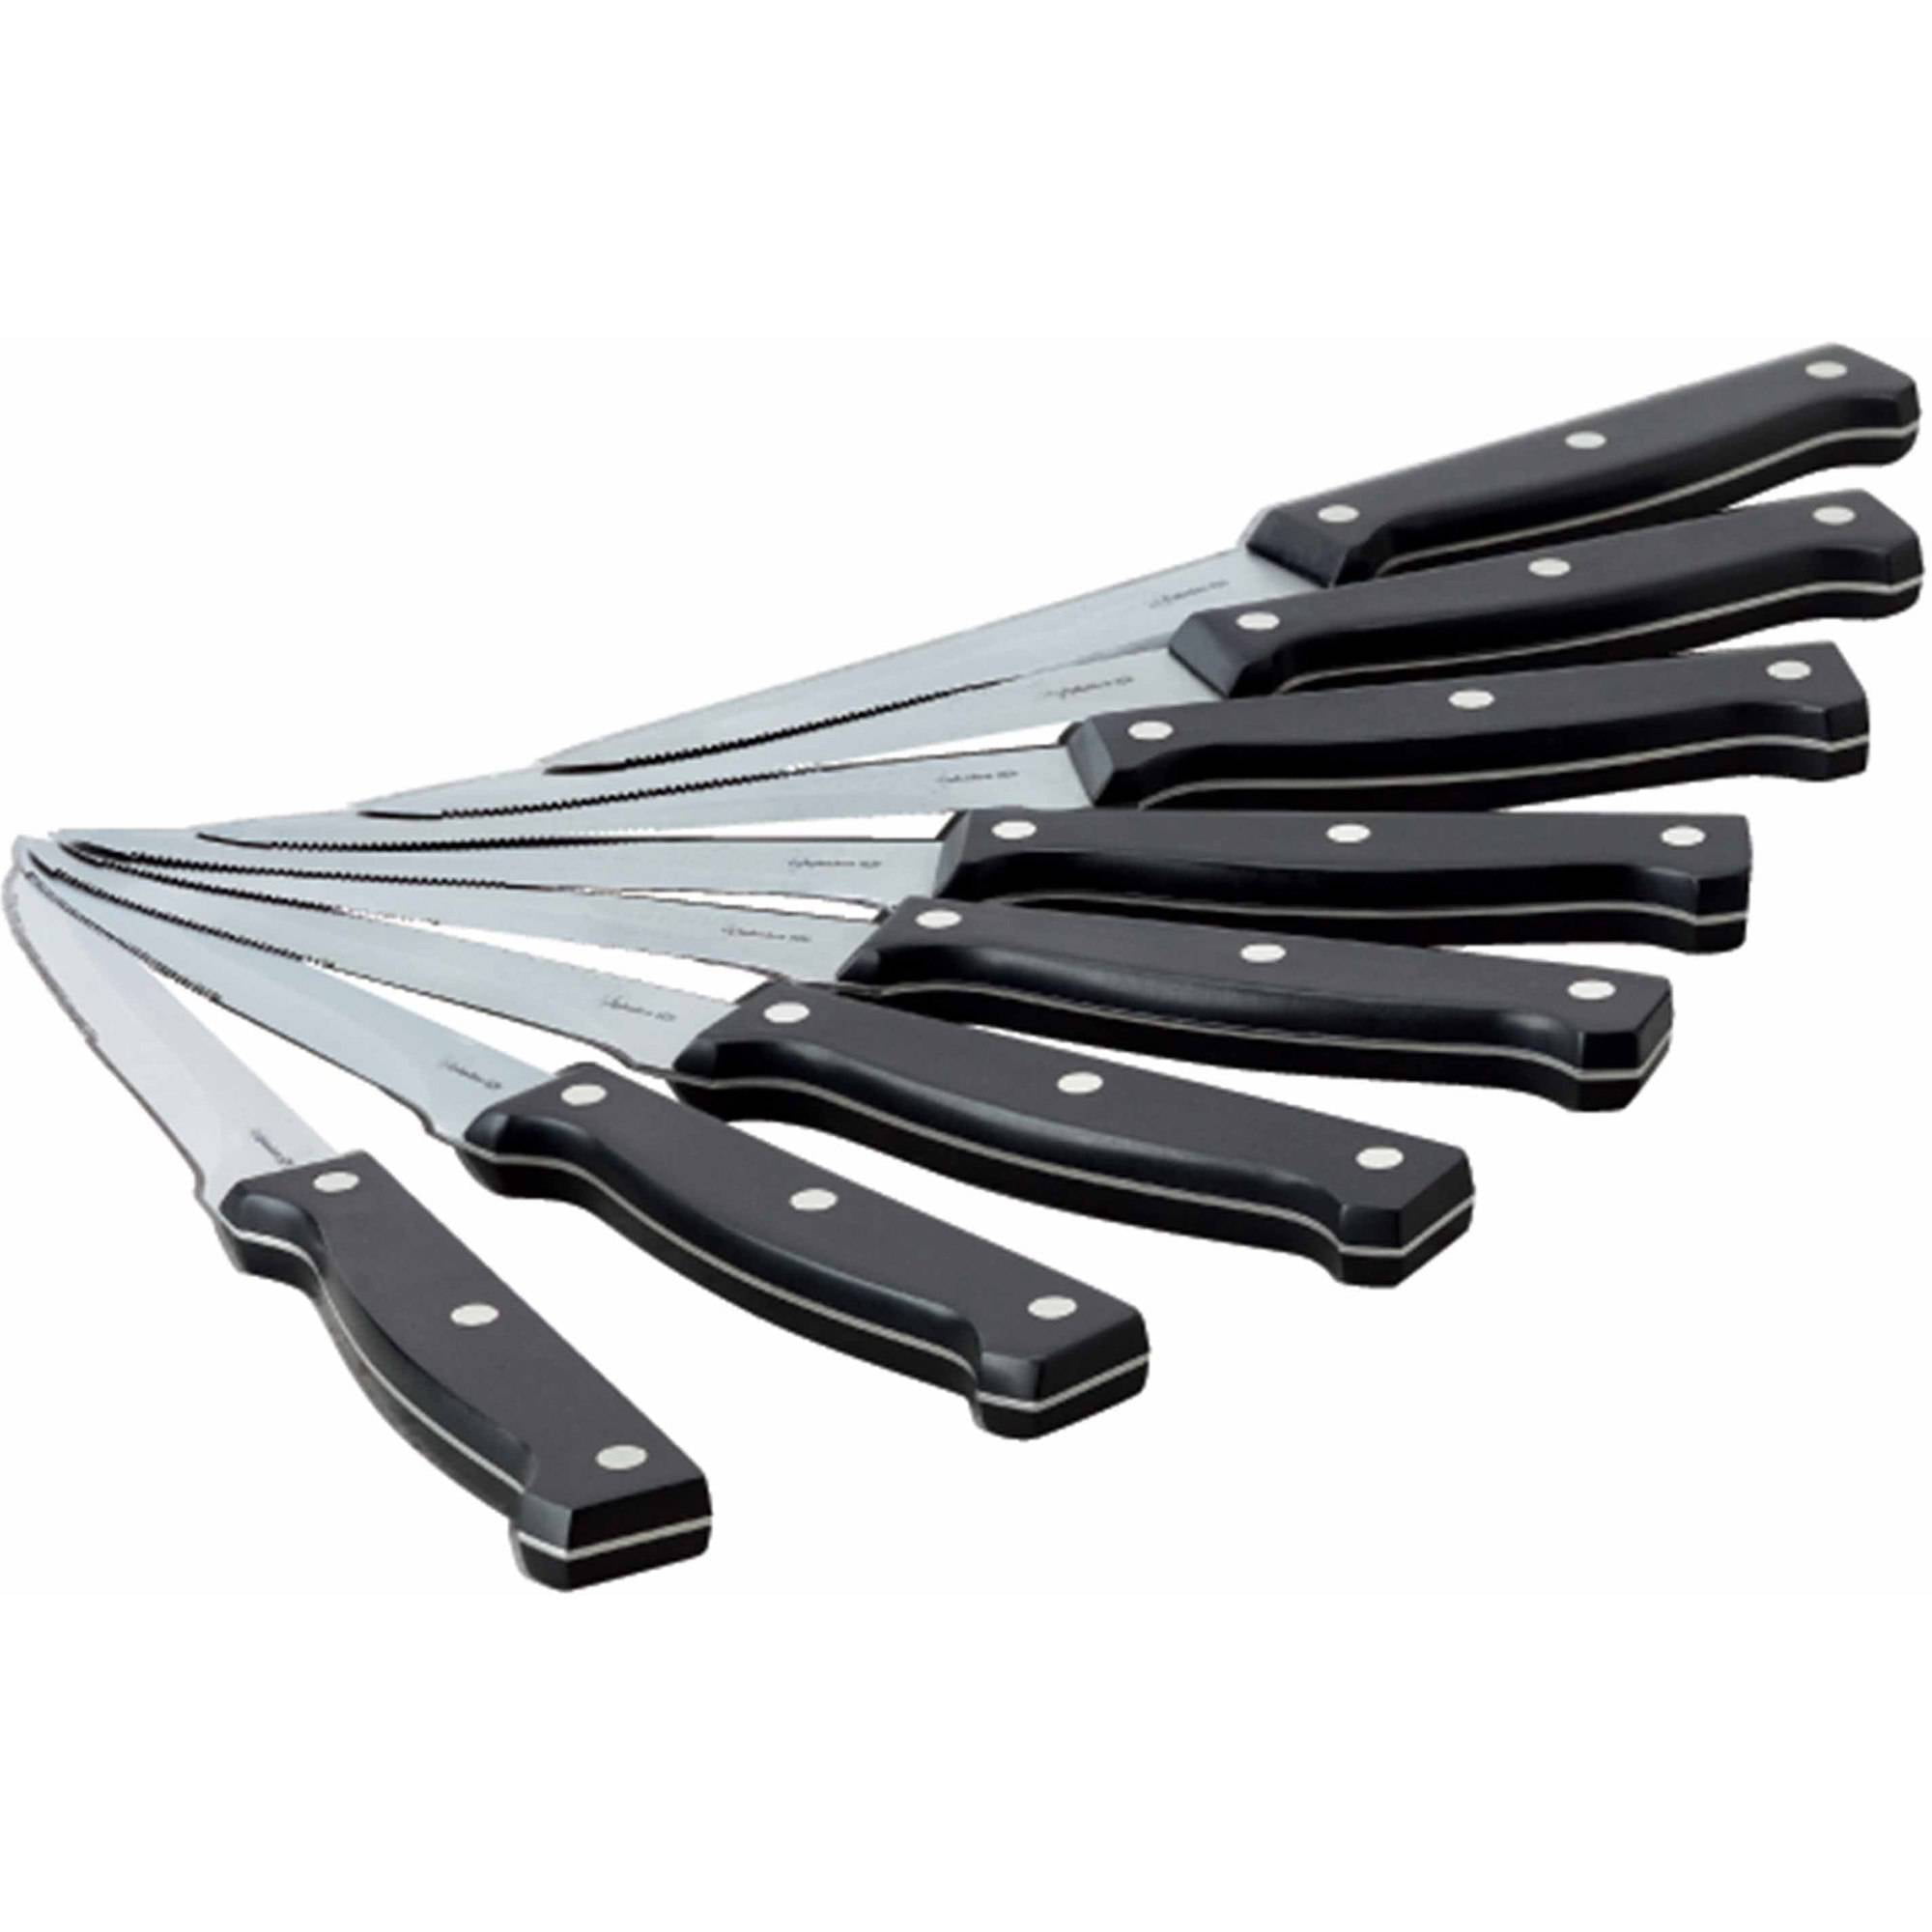 Set of 7 4 1/2” Cooking With Calphalon Black Steak Knives